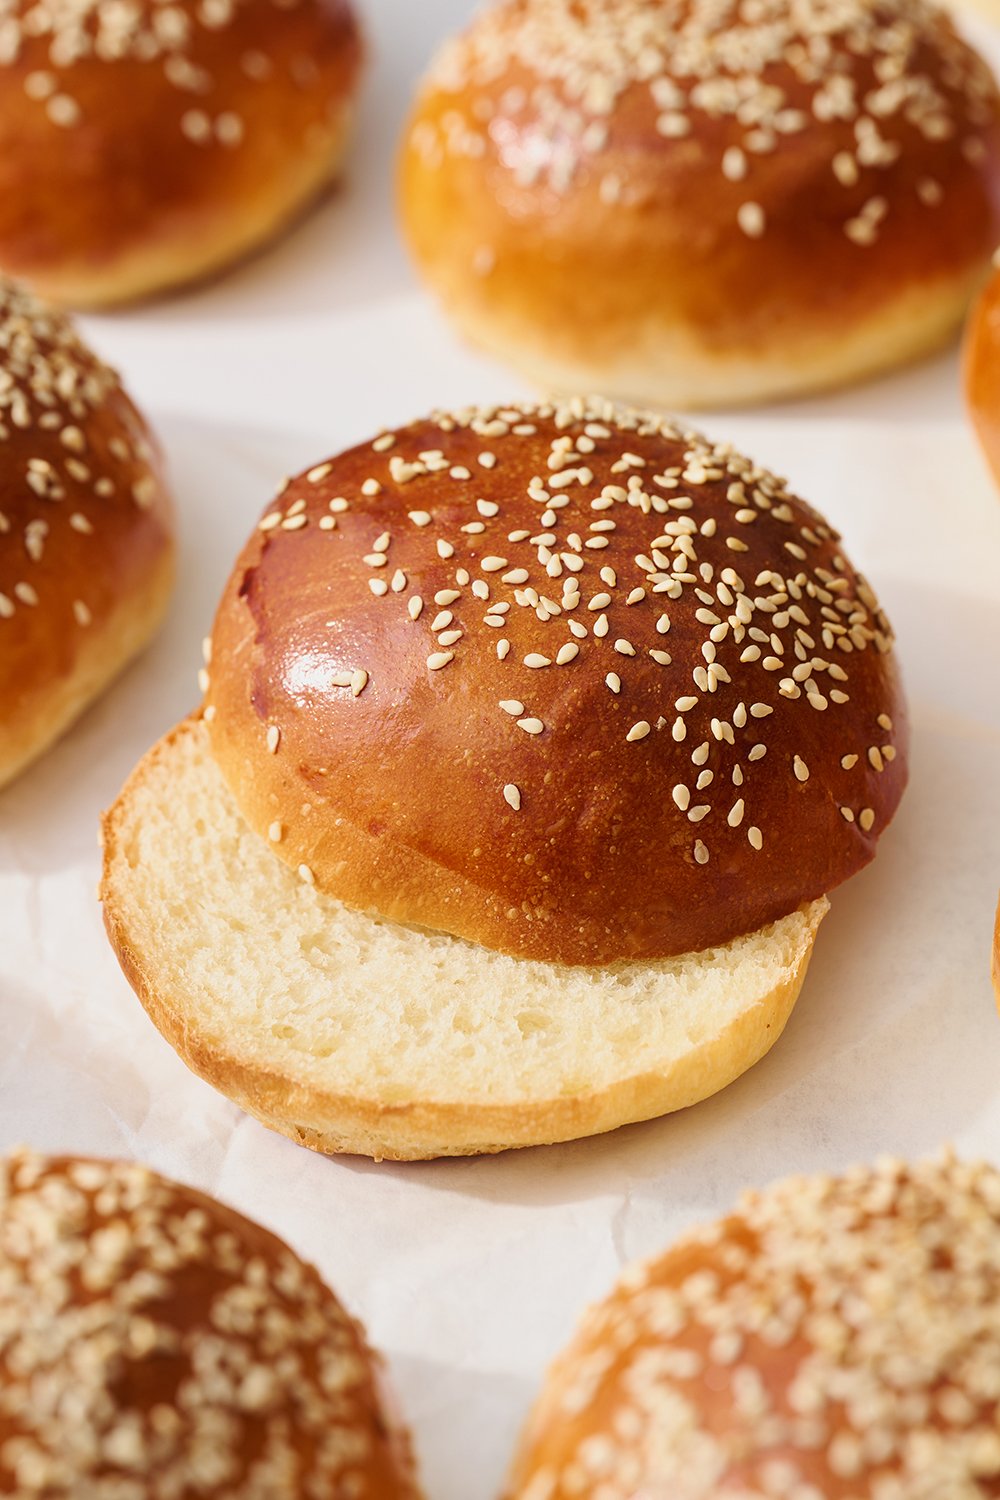 homemade burger bun with sesame seeds on top sliced in half - perfect for your burgers and BBQ sandwiches!